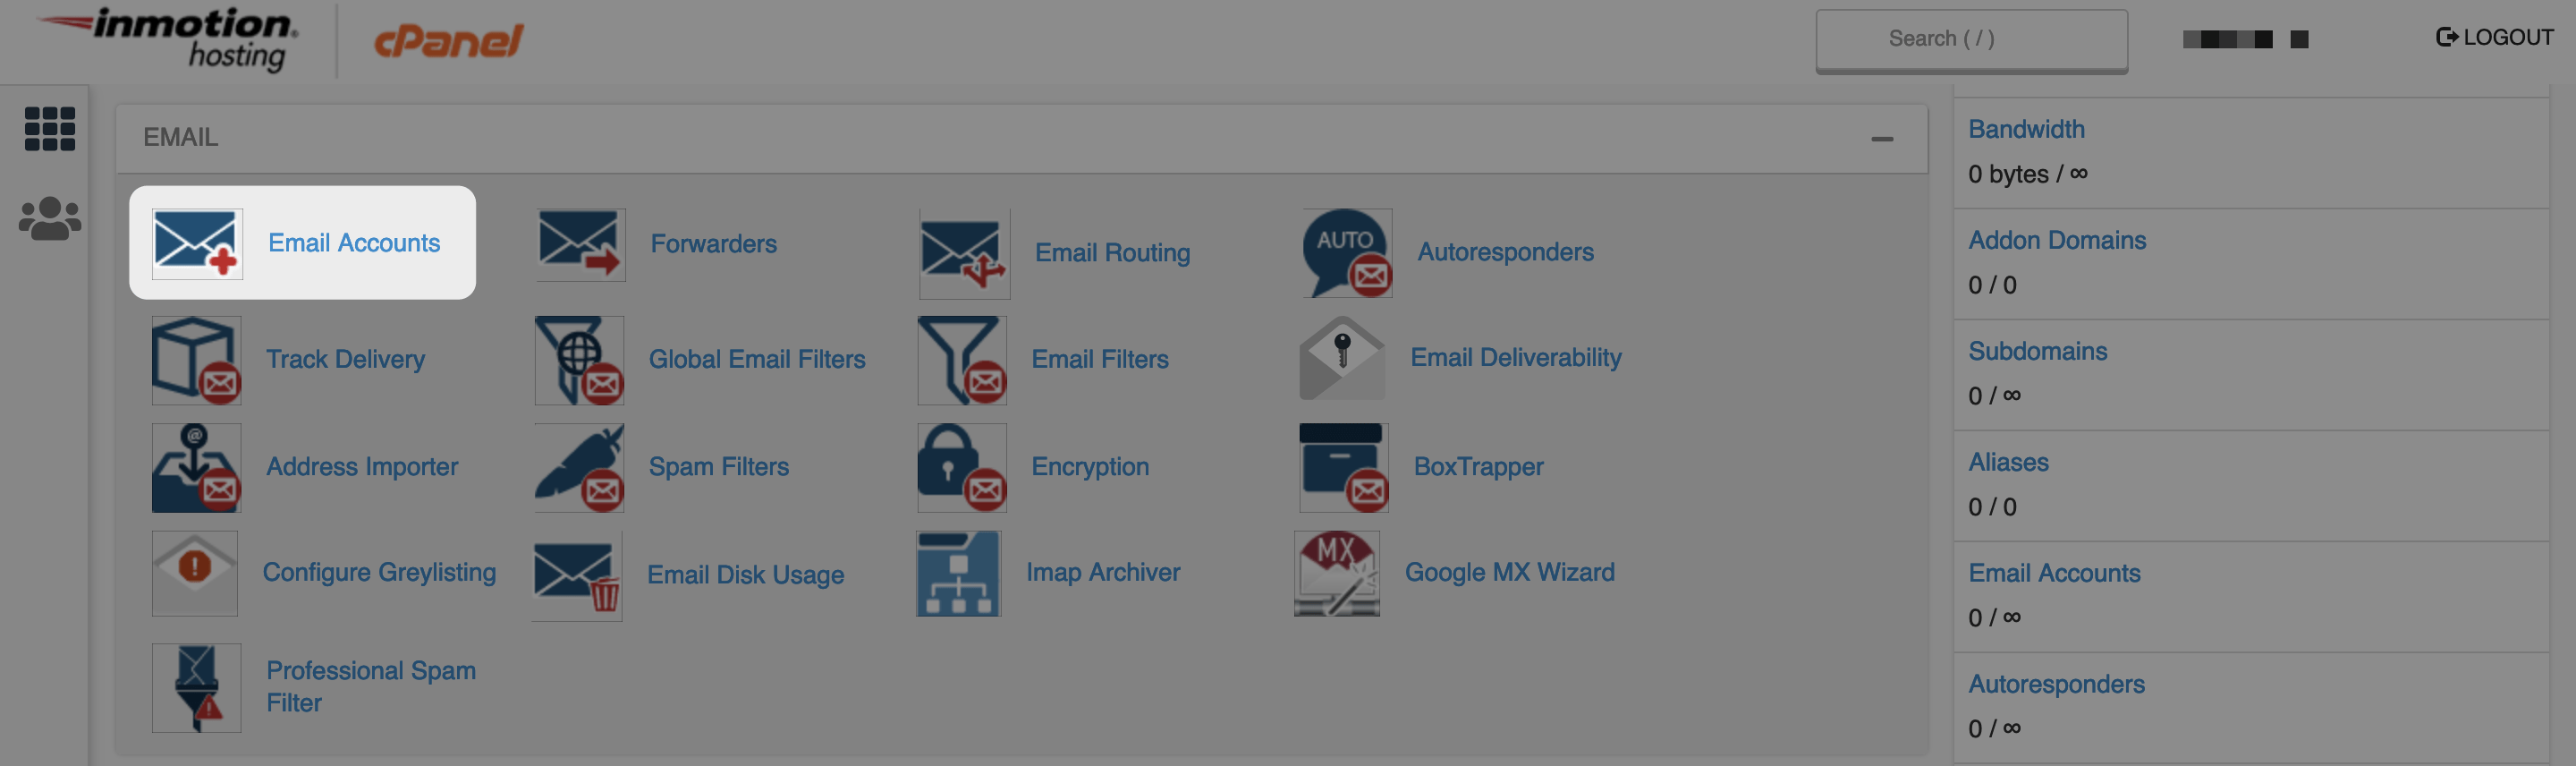 The Email Accounts option in cPanel.